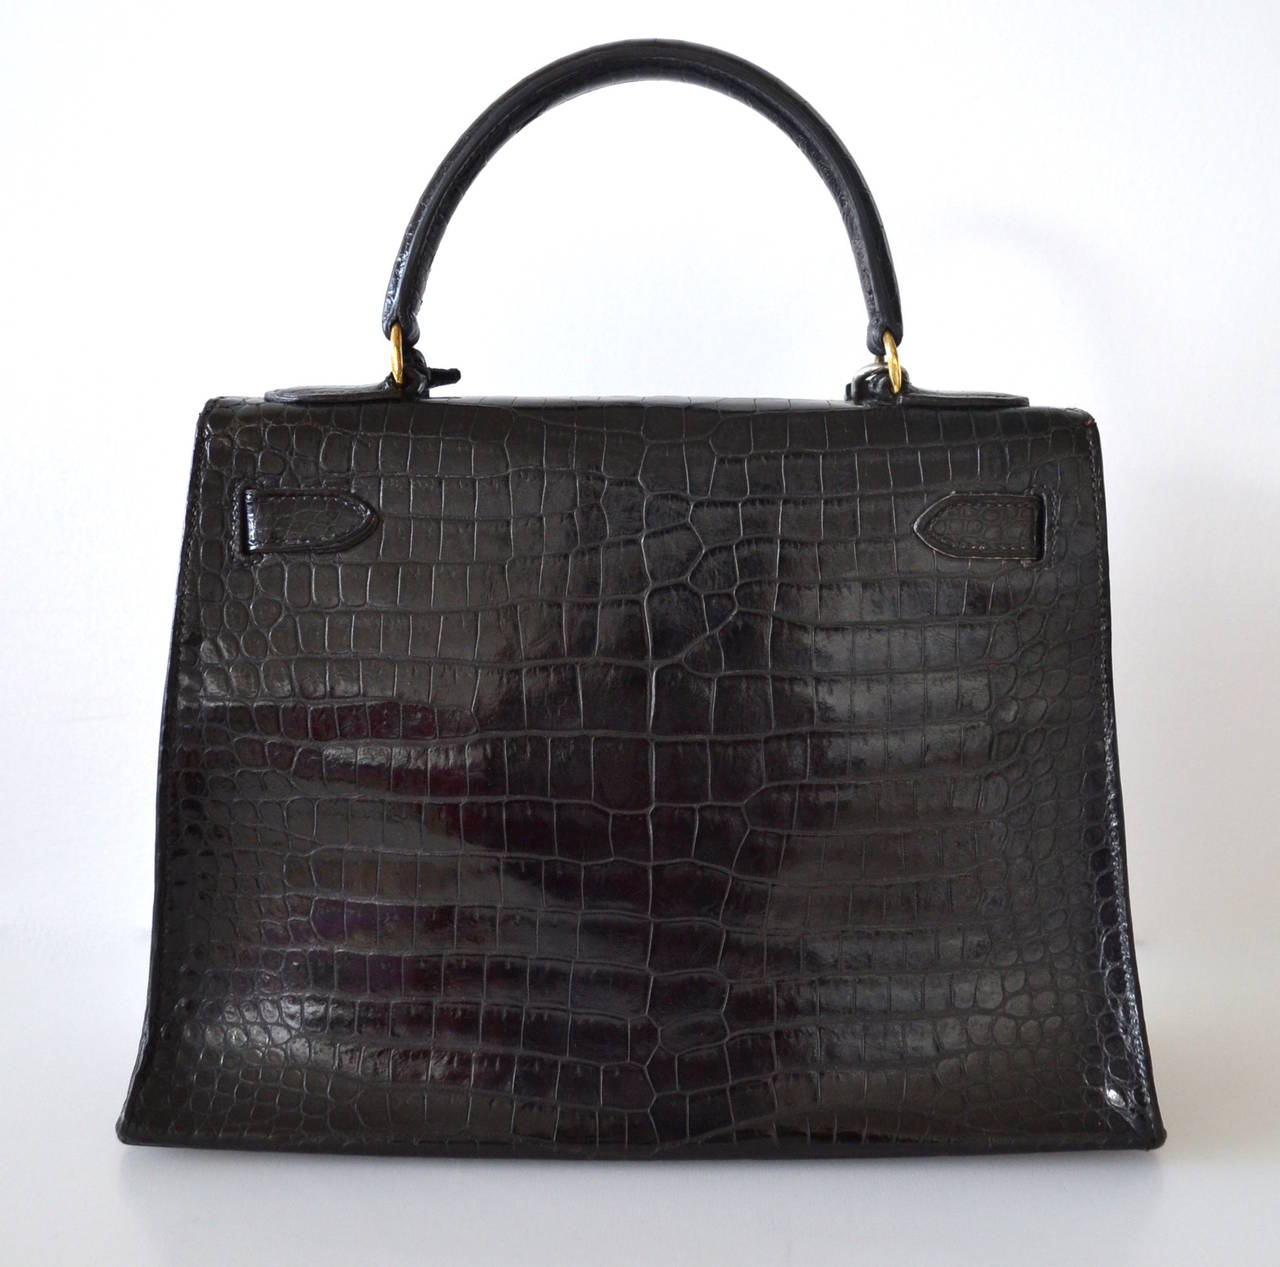 Hermès Kelly 28 black crocodile Porosus
 
Sellier version  
Crocodile Porosus Leather
Gold plated hardware
 
Good condition
Crocodile is in very good condition with few usual scratches 
Gentle scratches on hardware
Corners are very